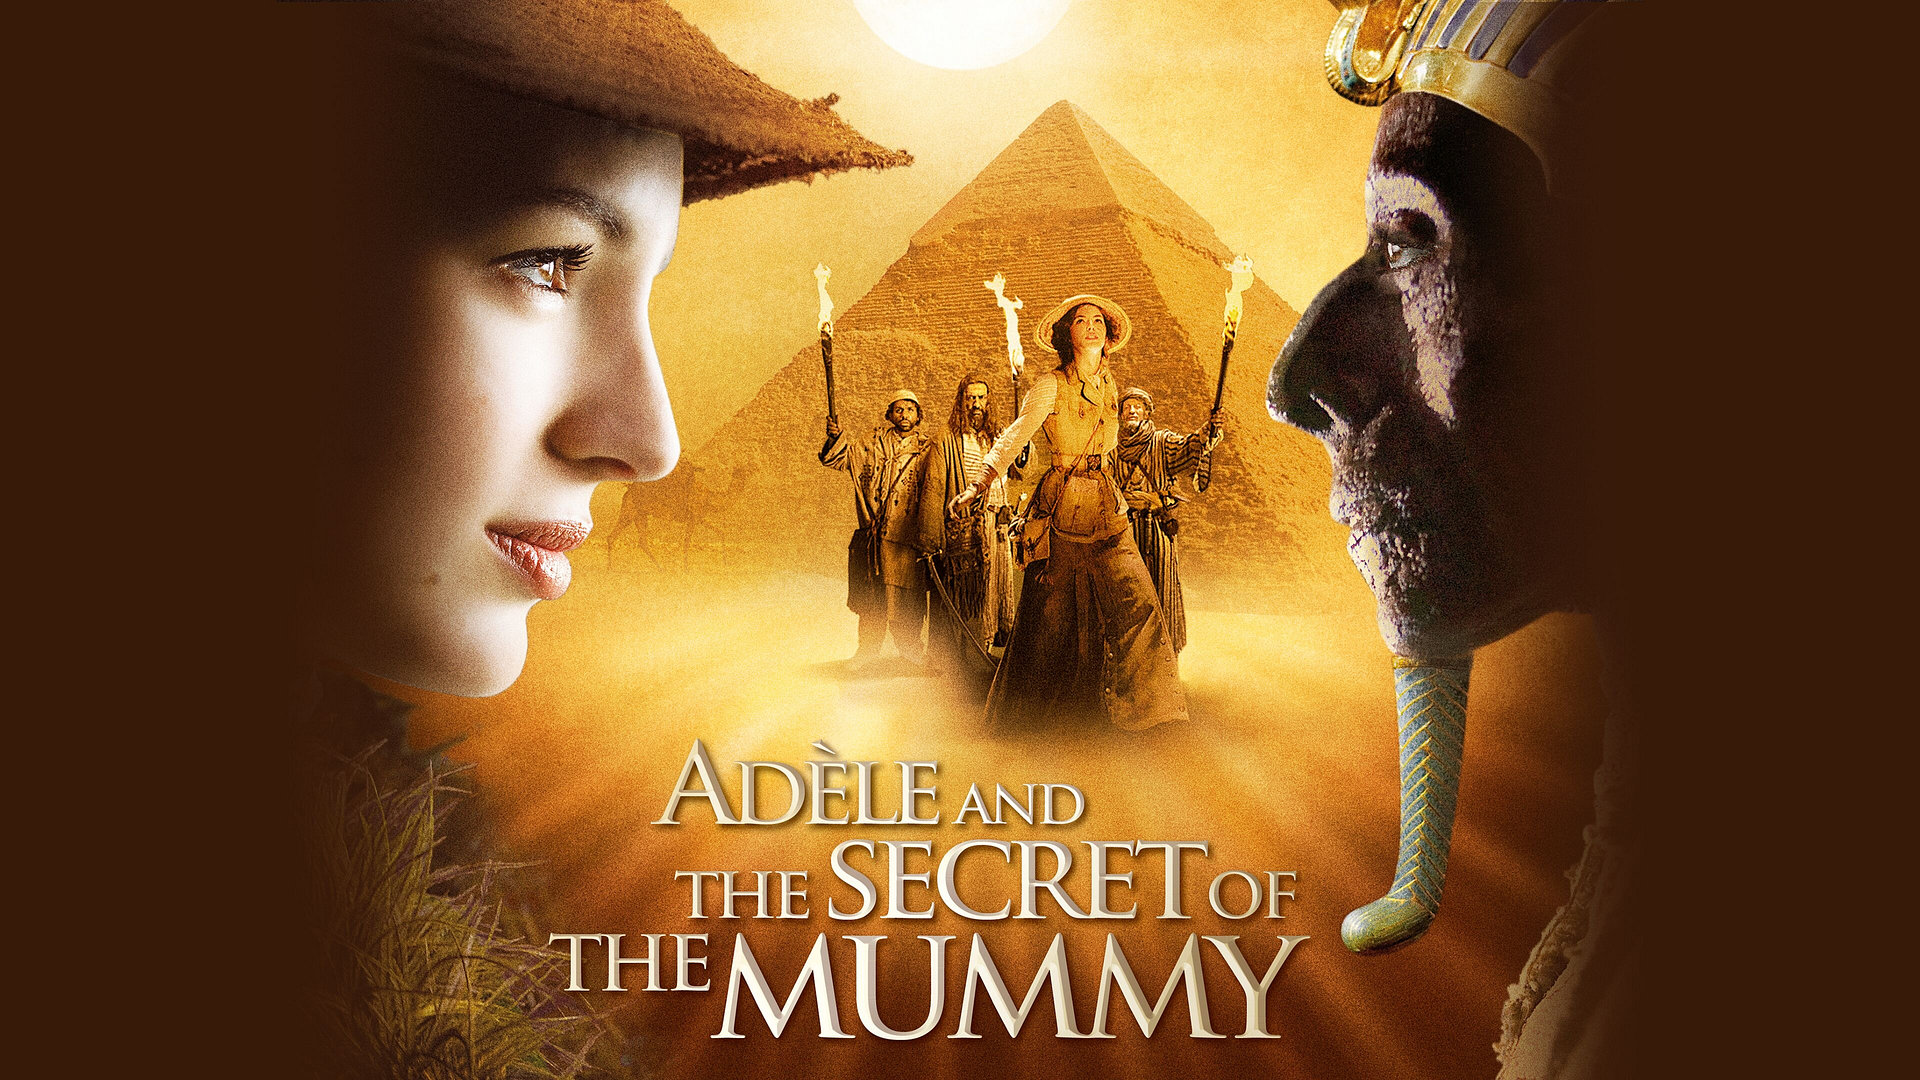 Adele and the Secret of the Mummy